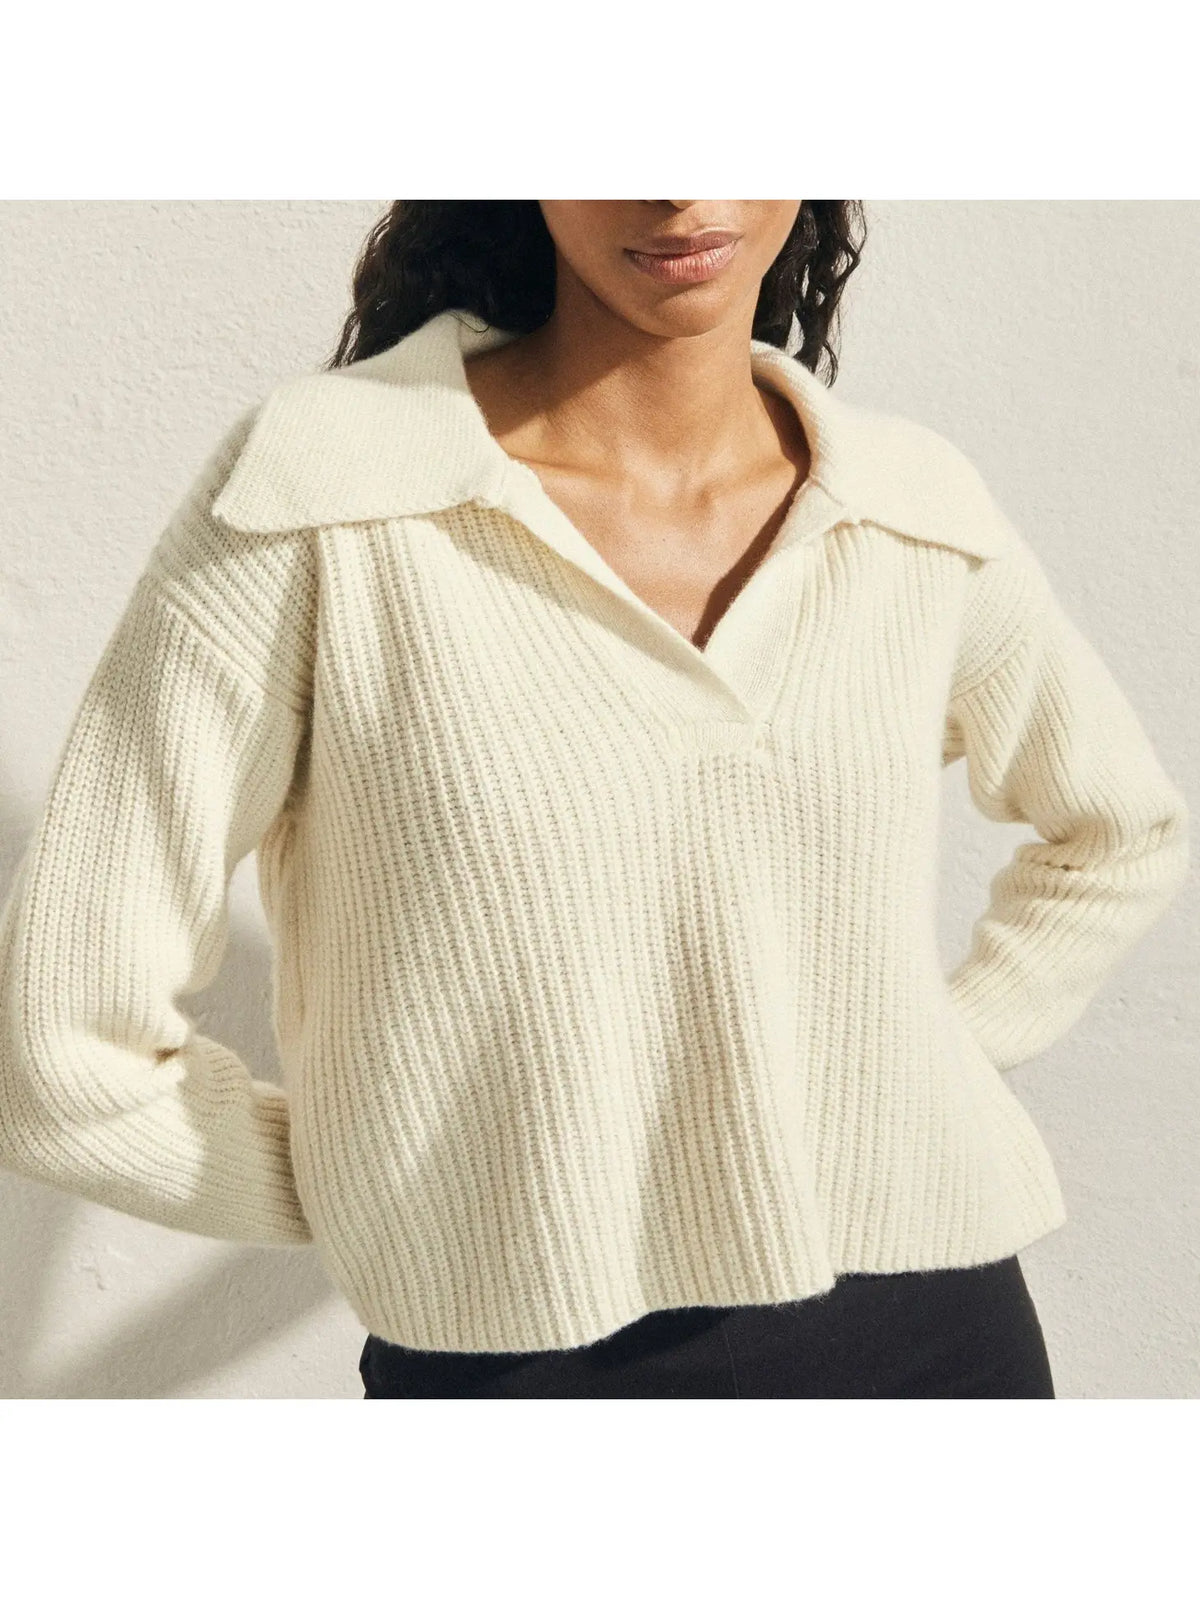 ALOHAS Airliner Cream Tricot Sweater